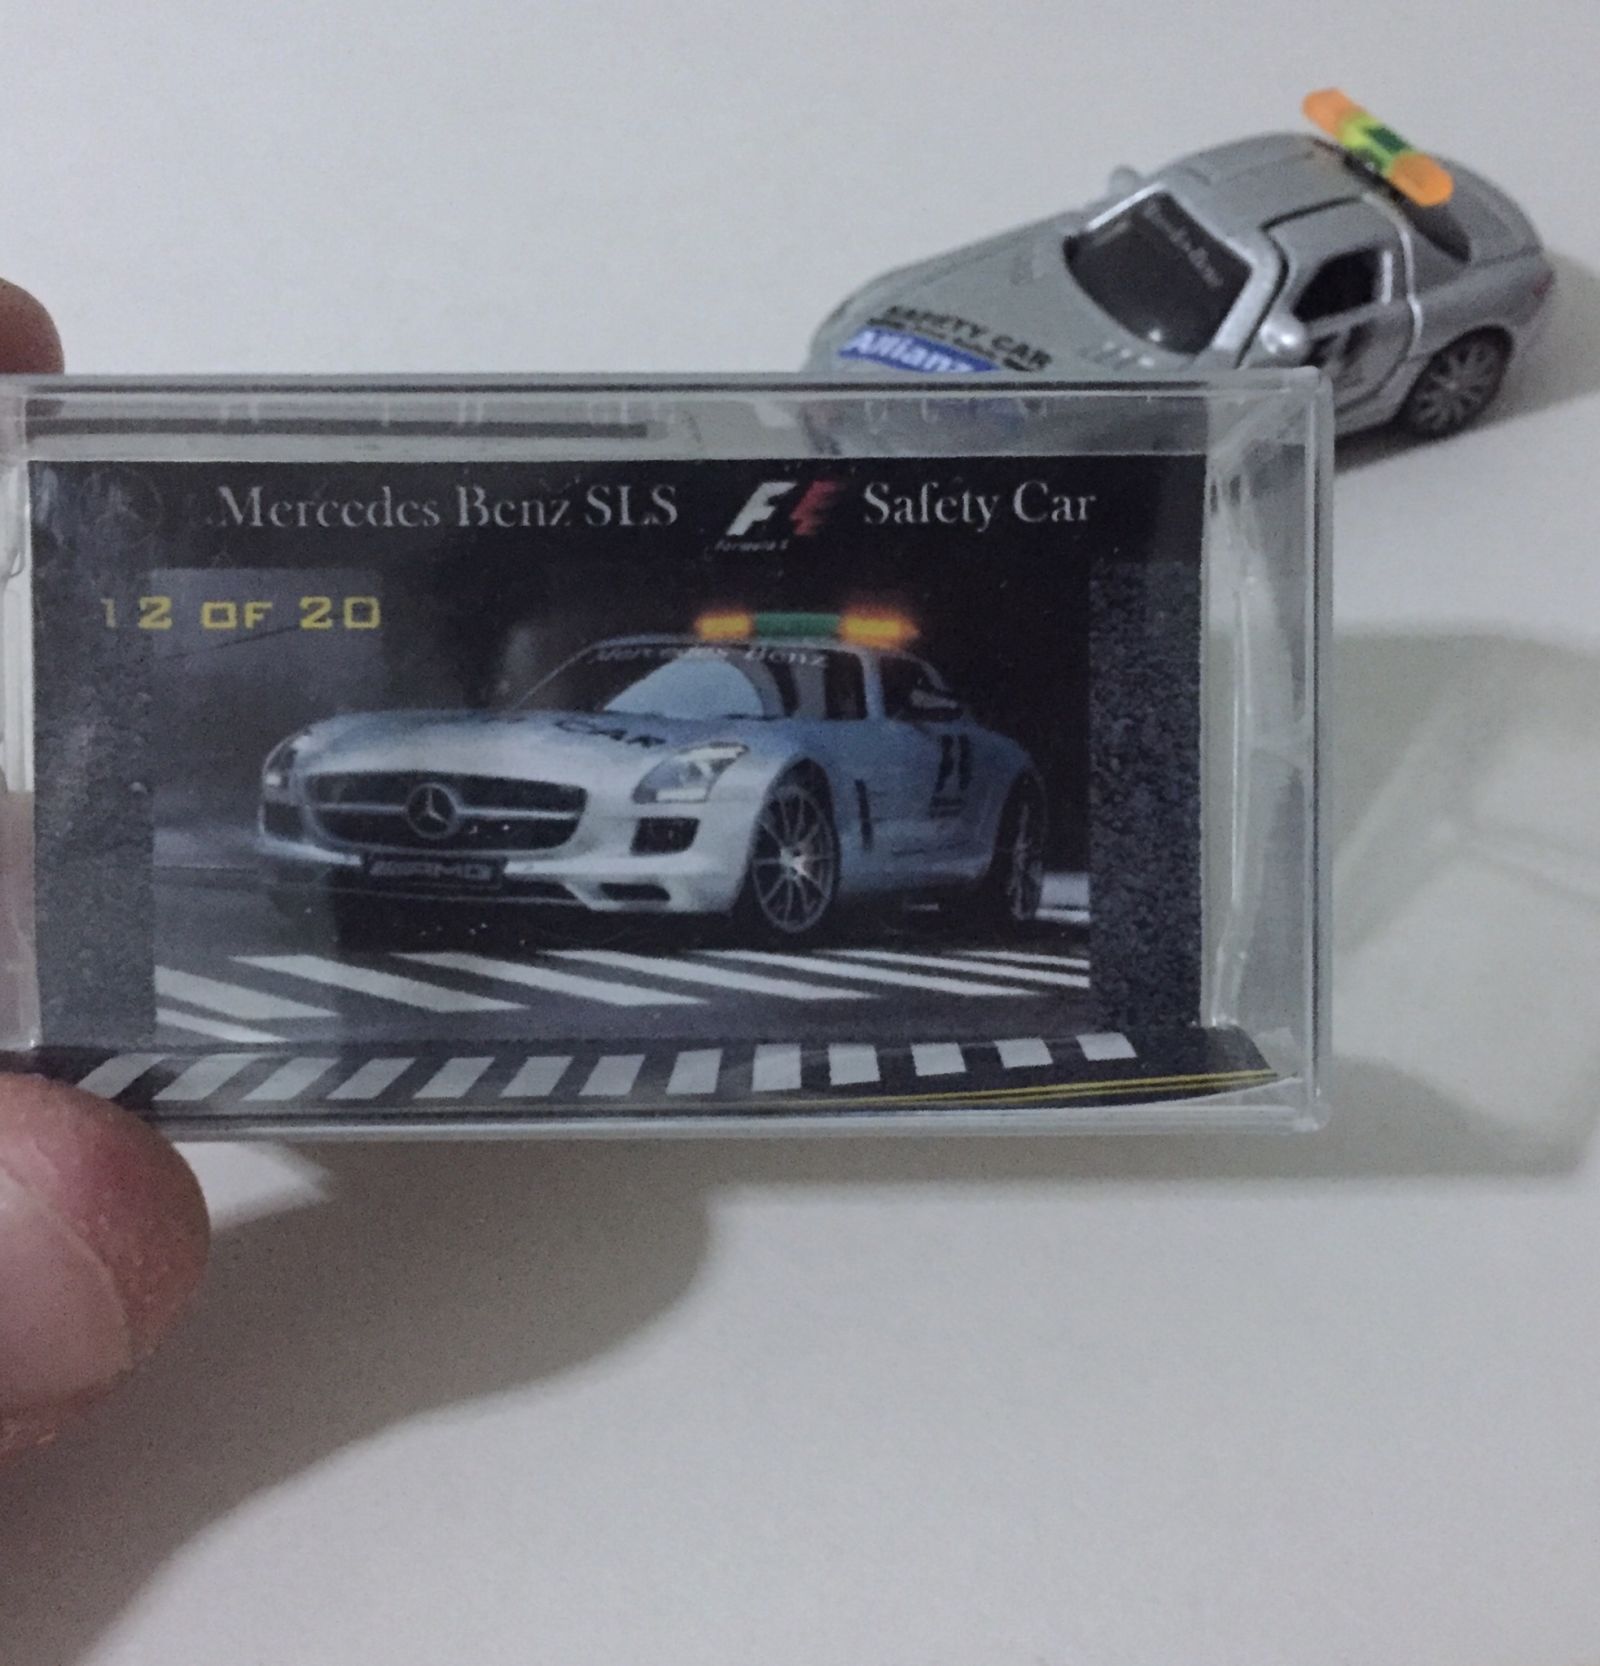 Custom printed cardboard cutout depicting the car it’s supposed to be. Only 20 custom pieces made for the entire country of Singapore, and I’ve got the 12th one!